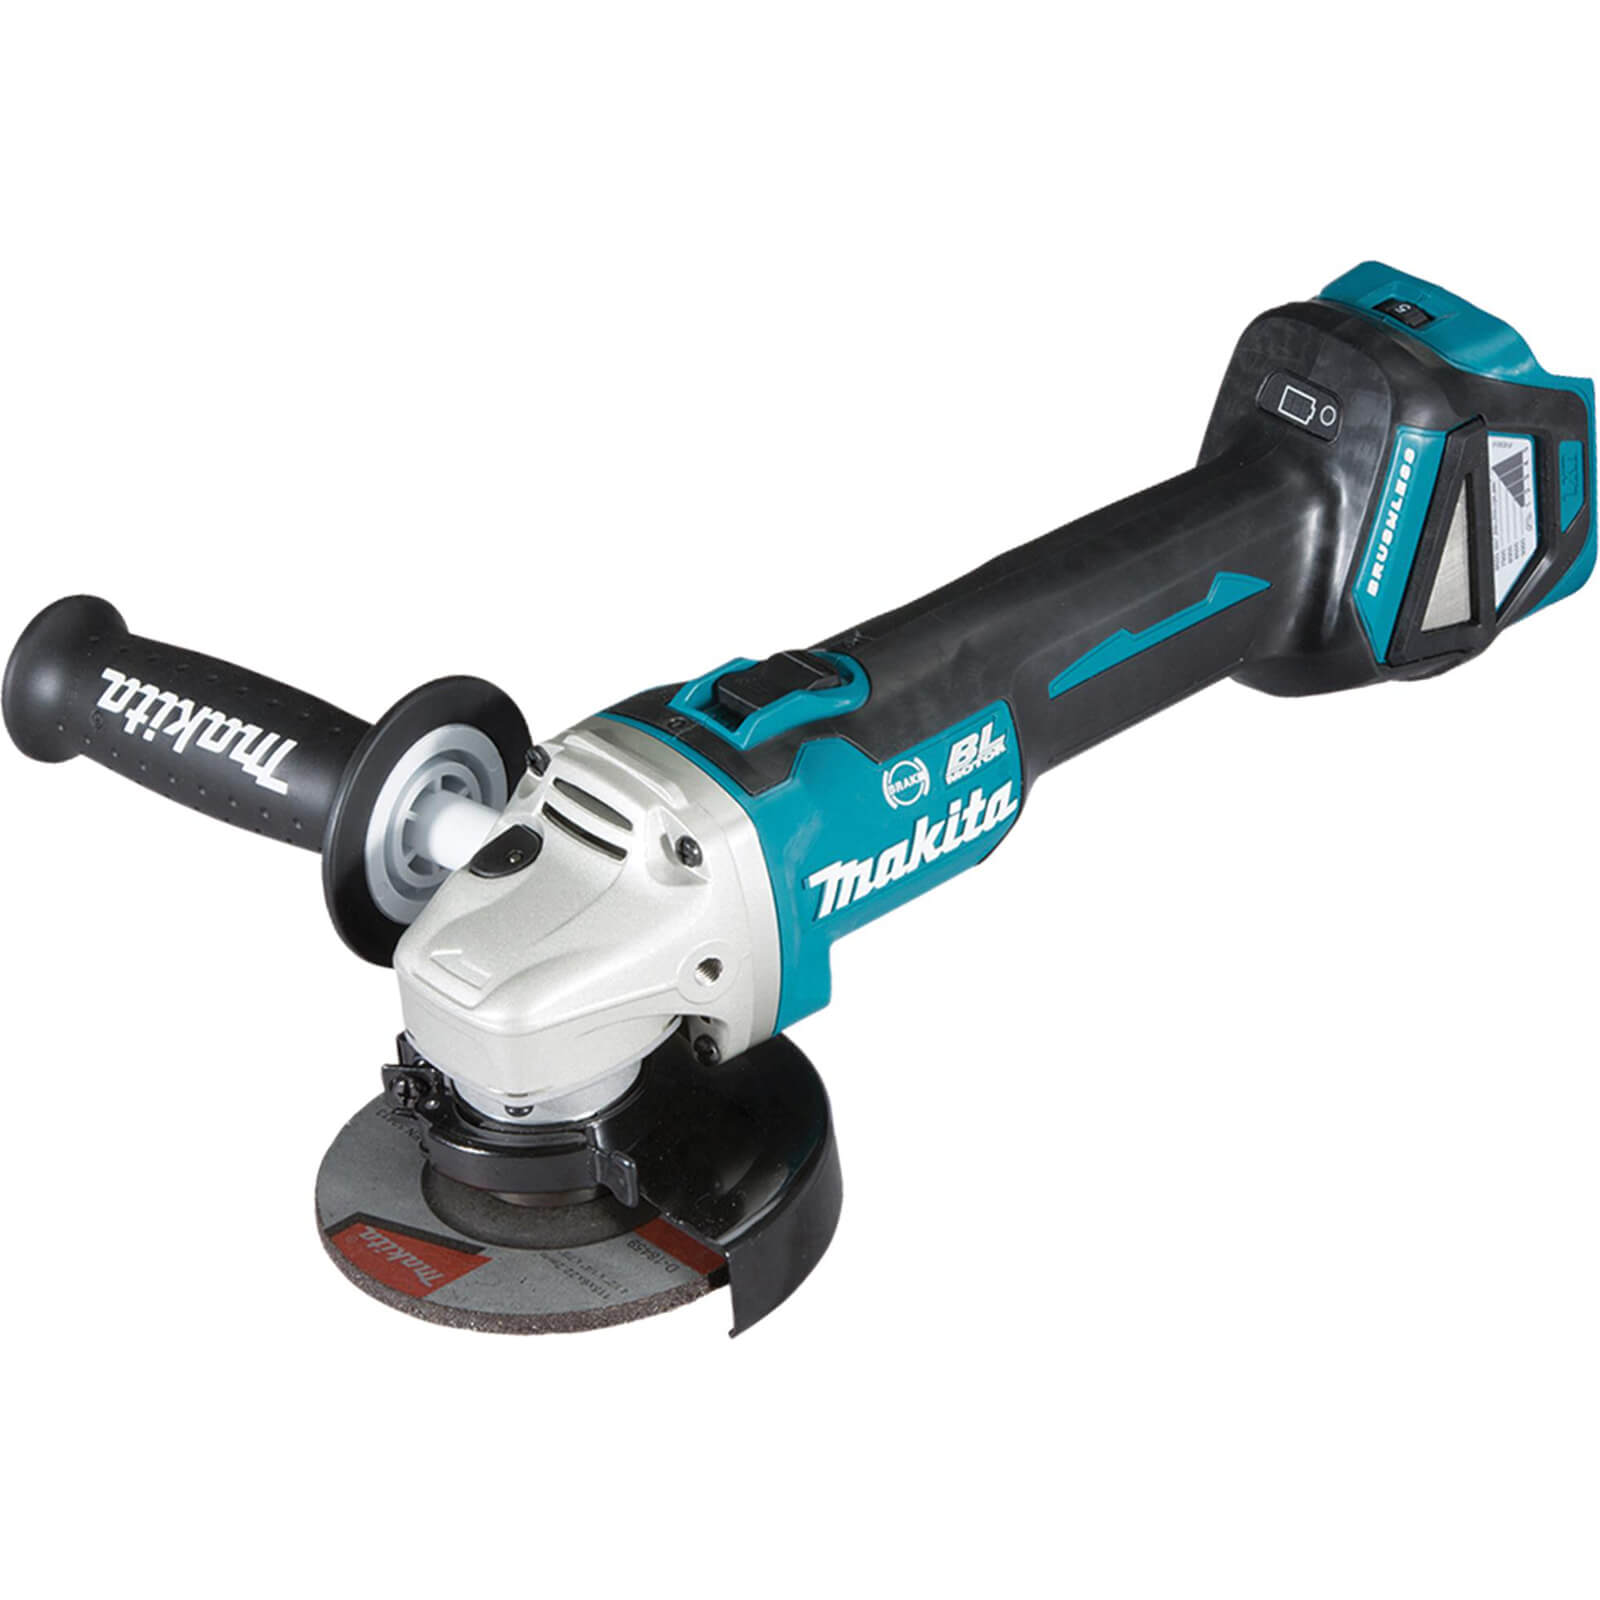 Makita DGA463 18v LXT Cordless Brushless Slide Switch Angle Grinder 115mm No Batteries No Charger No Case